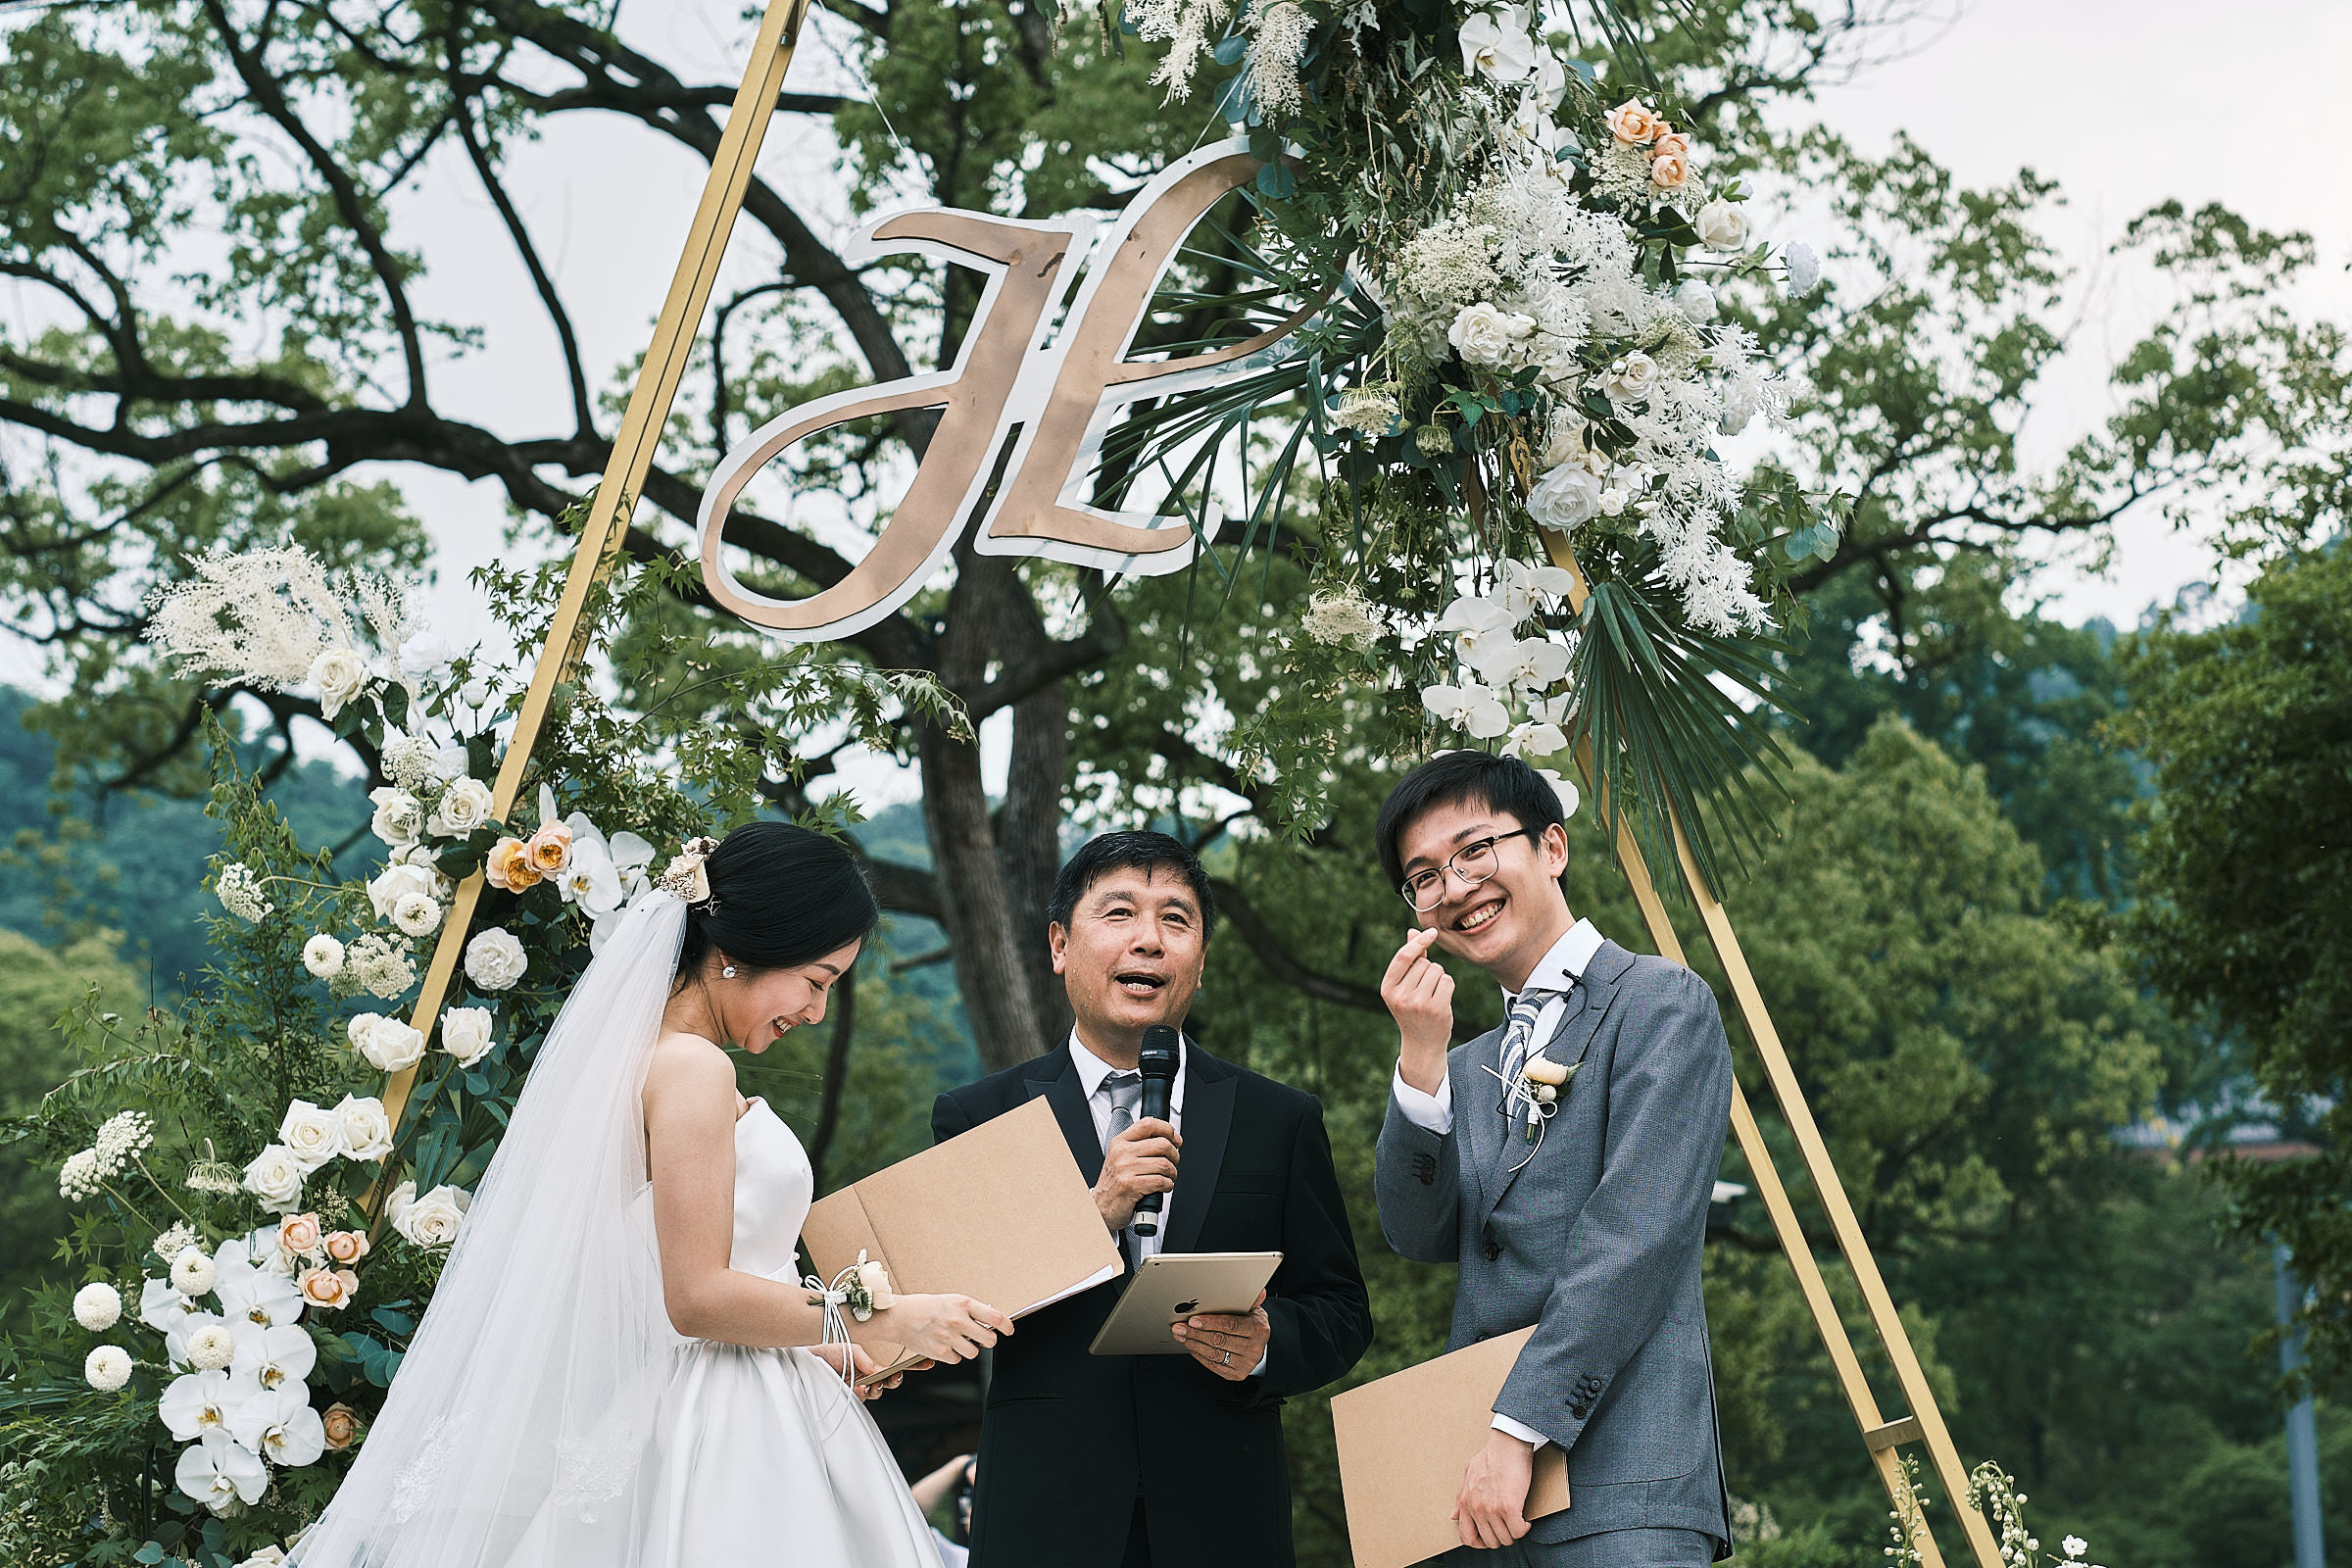 Happy Groom And Bride In The Middle Of Outdoor And Green Ceremony With Officiant